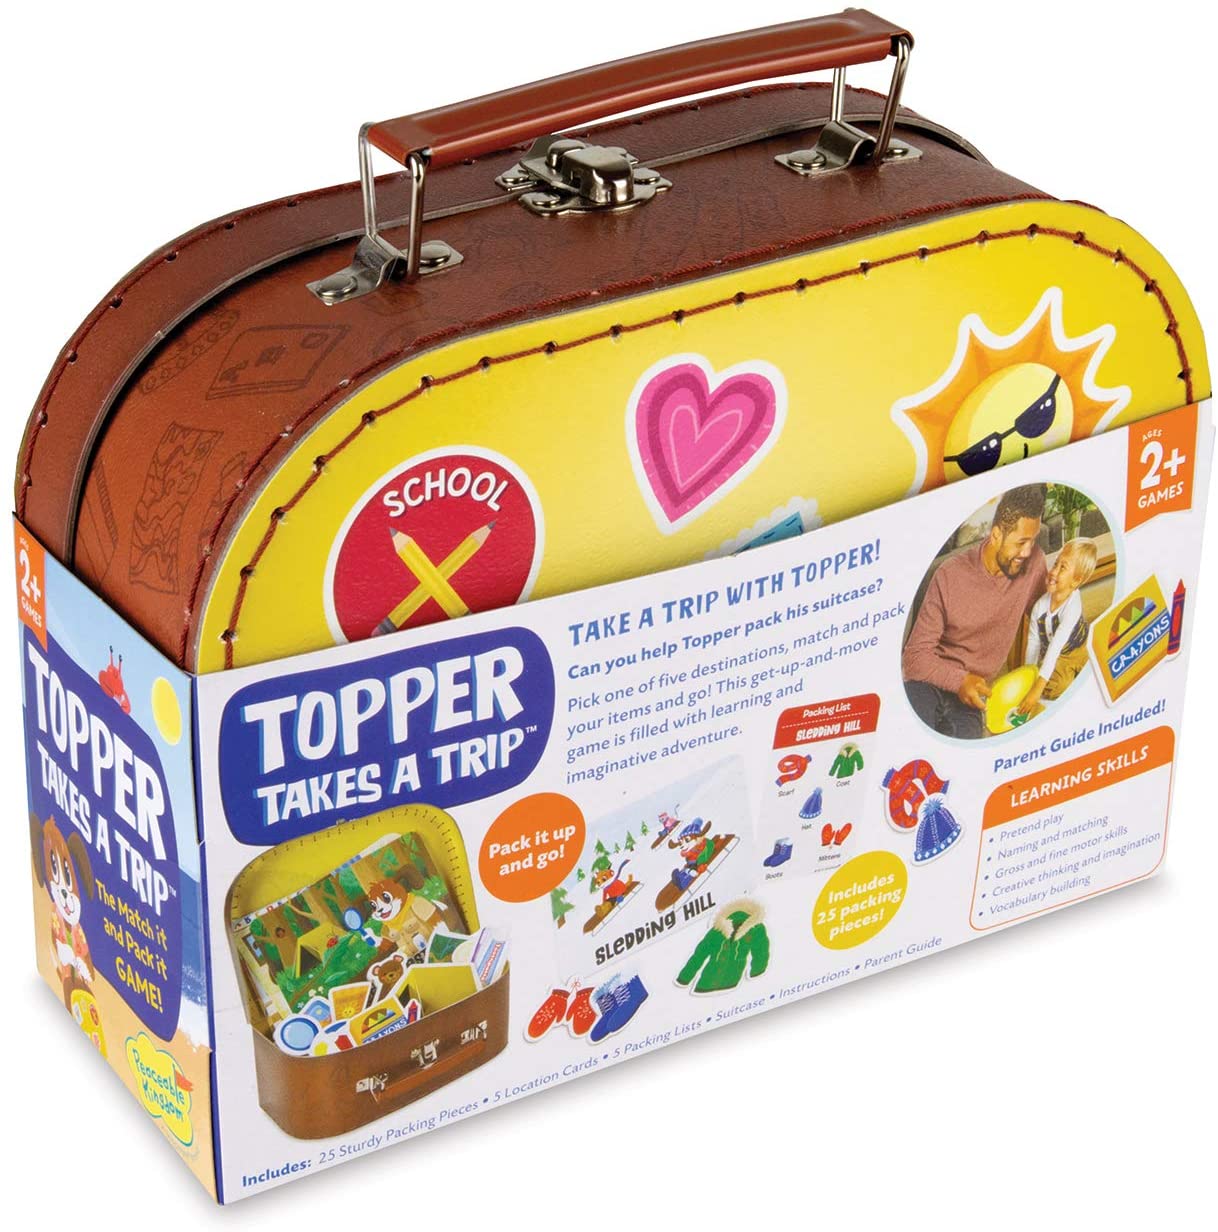 Topper Takes a Trip by Peaceable Kingdom, USA Game